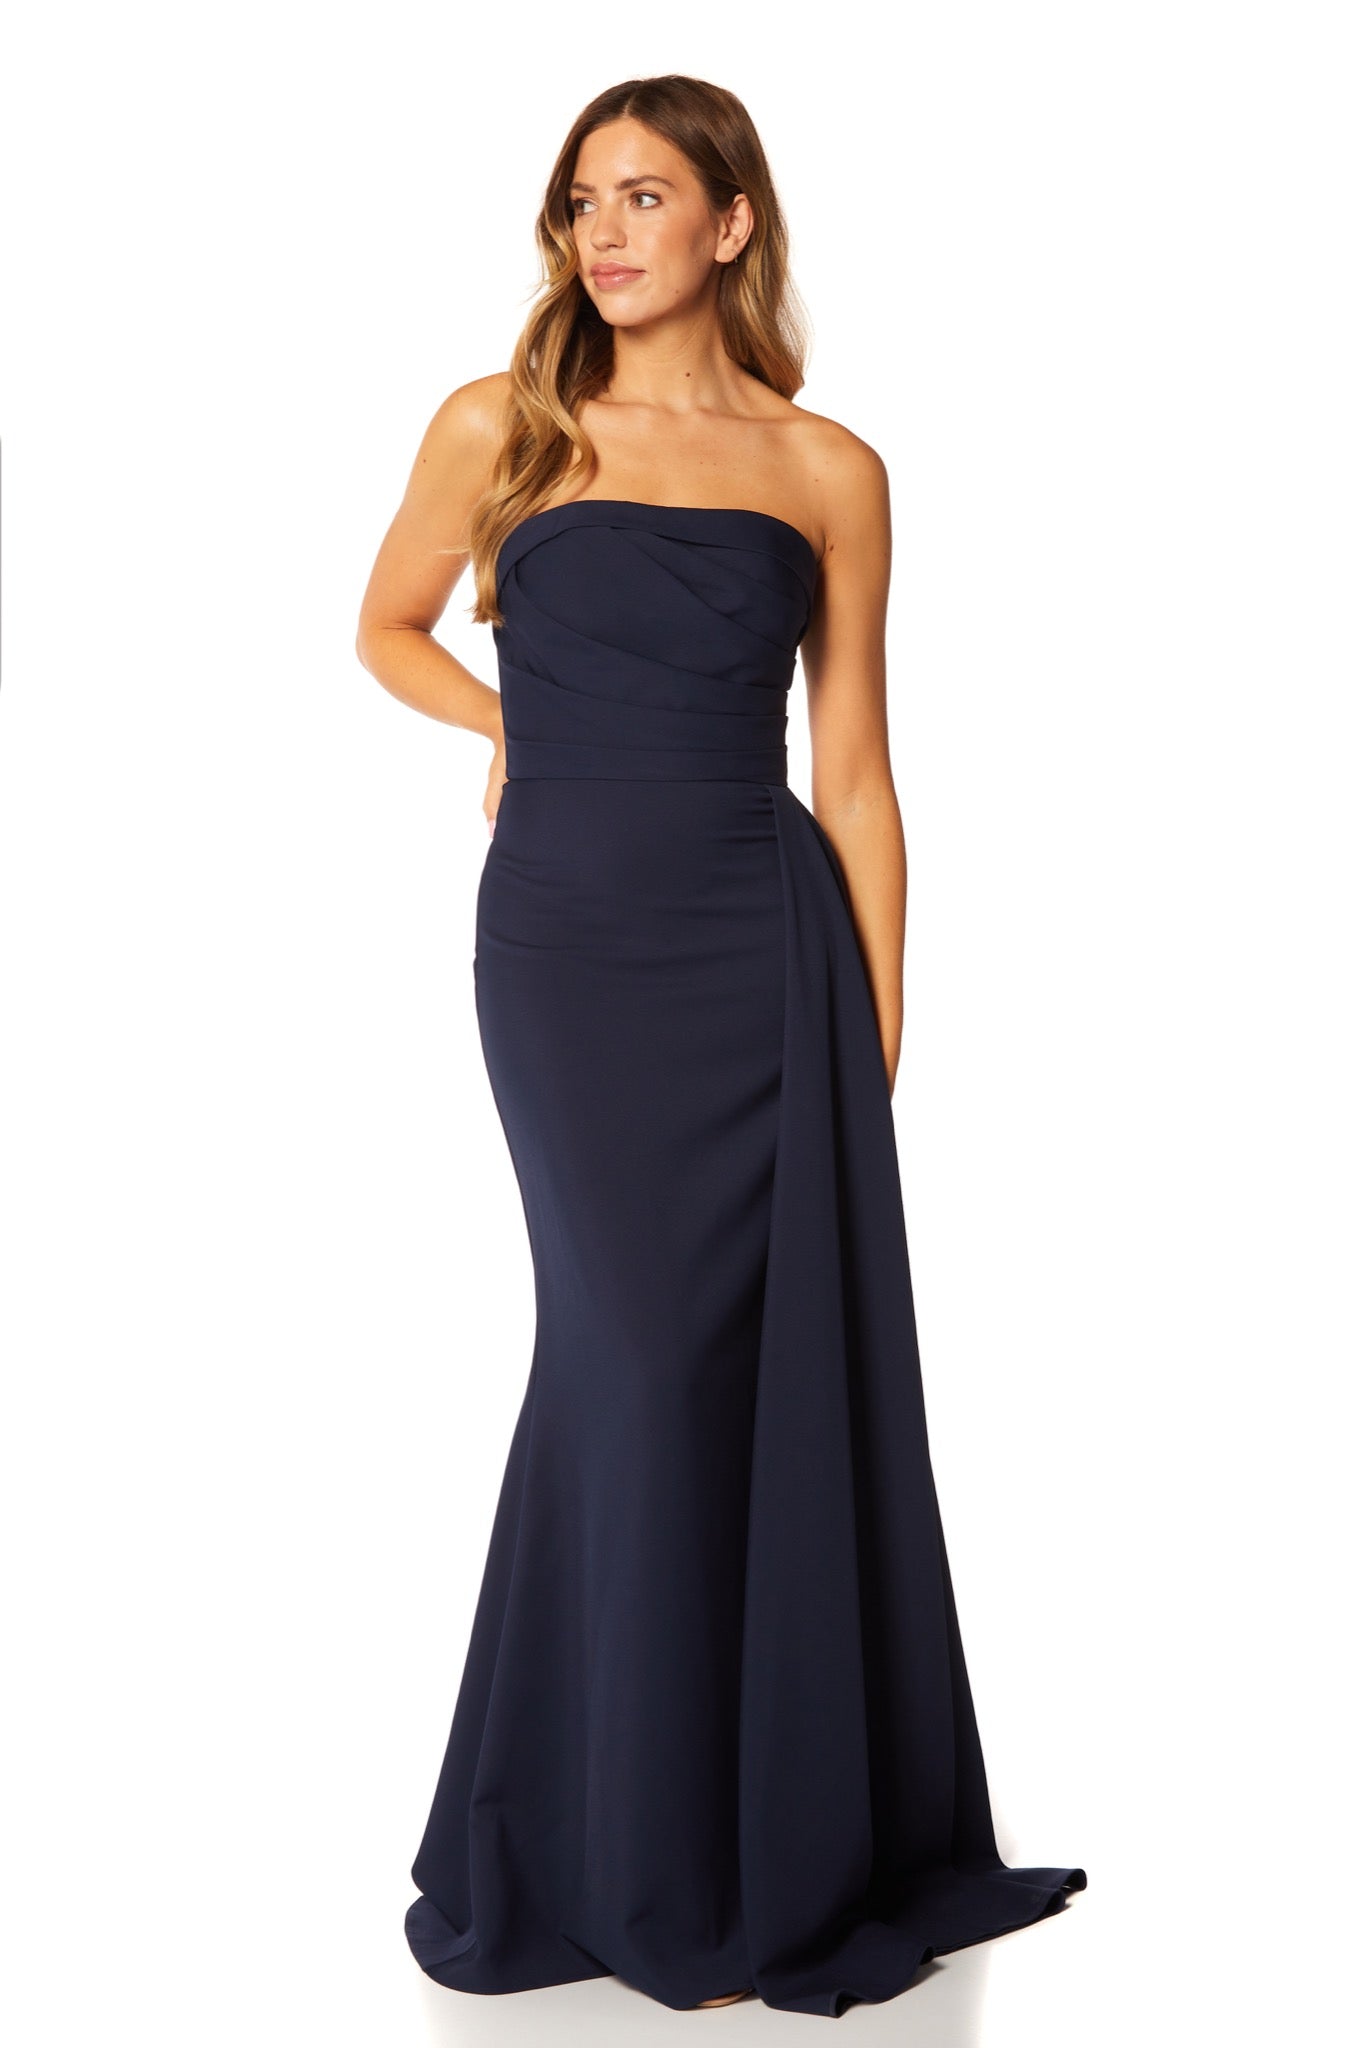 Jarlo's Zo Strapless Maxi Dress with Pleated Side Skirt Drape in Navy ...